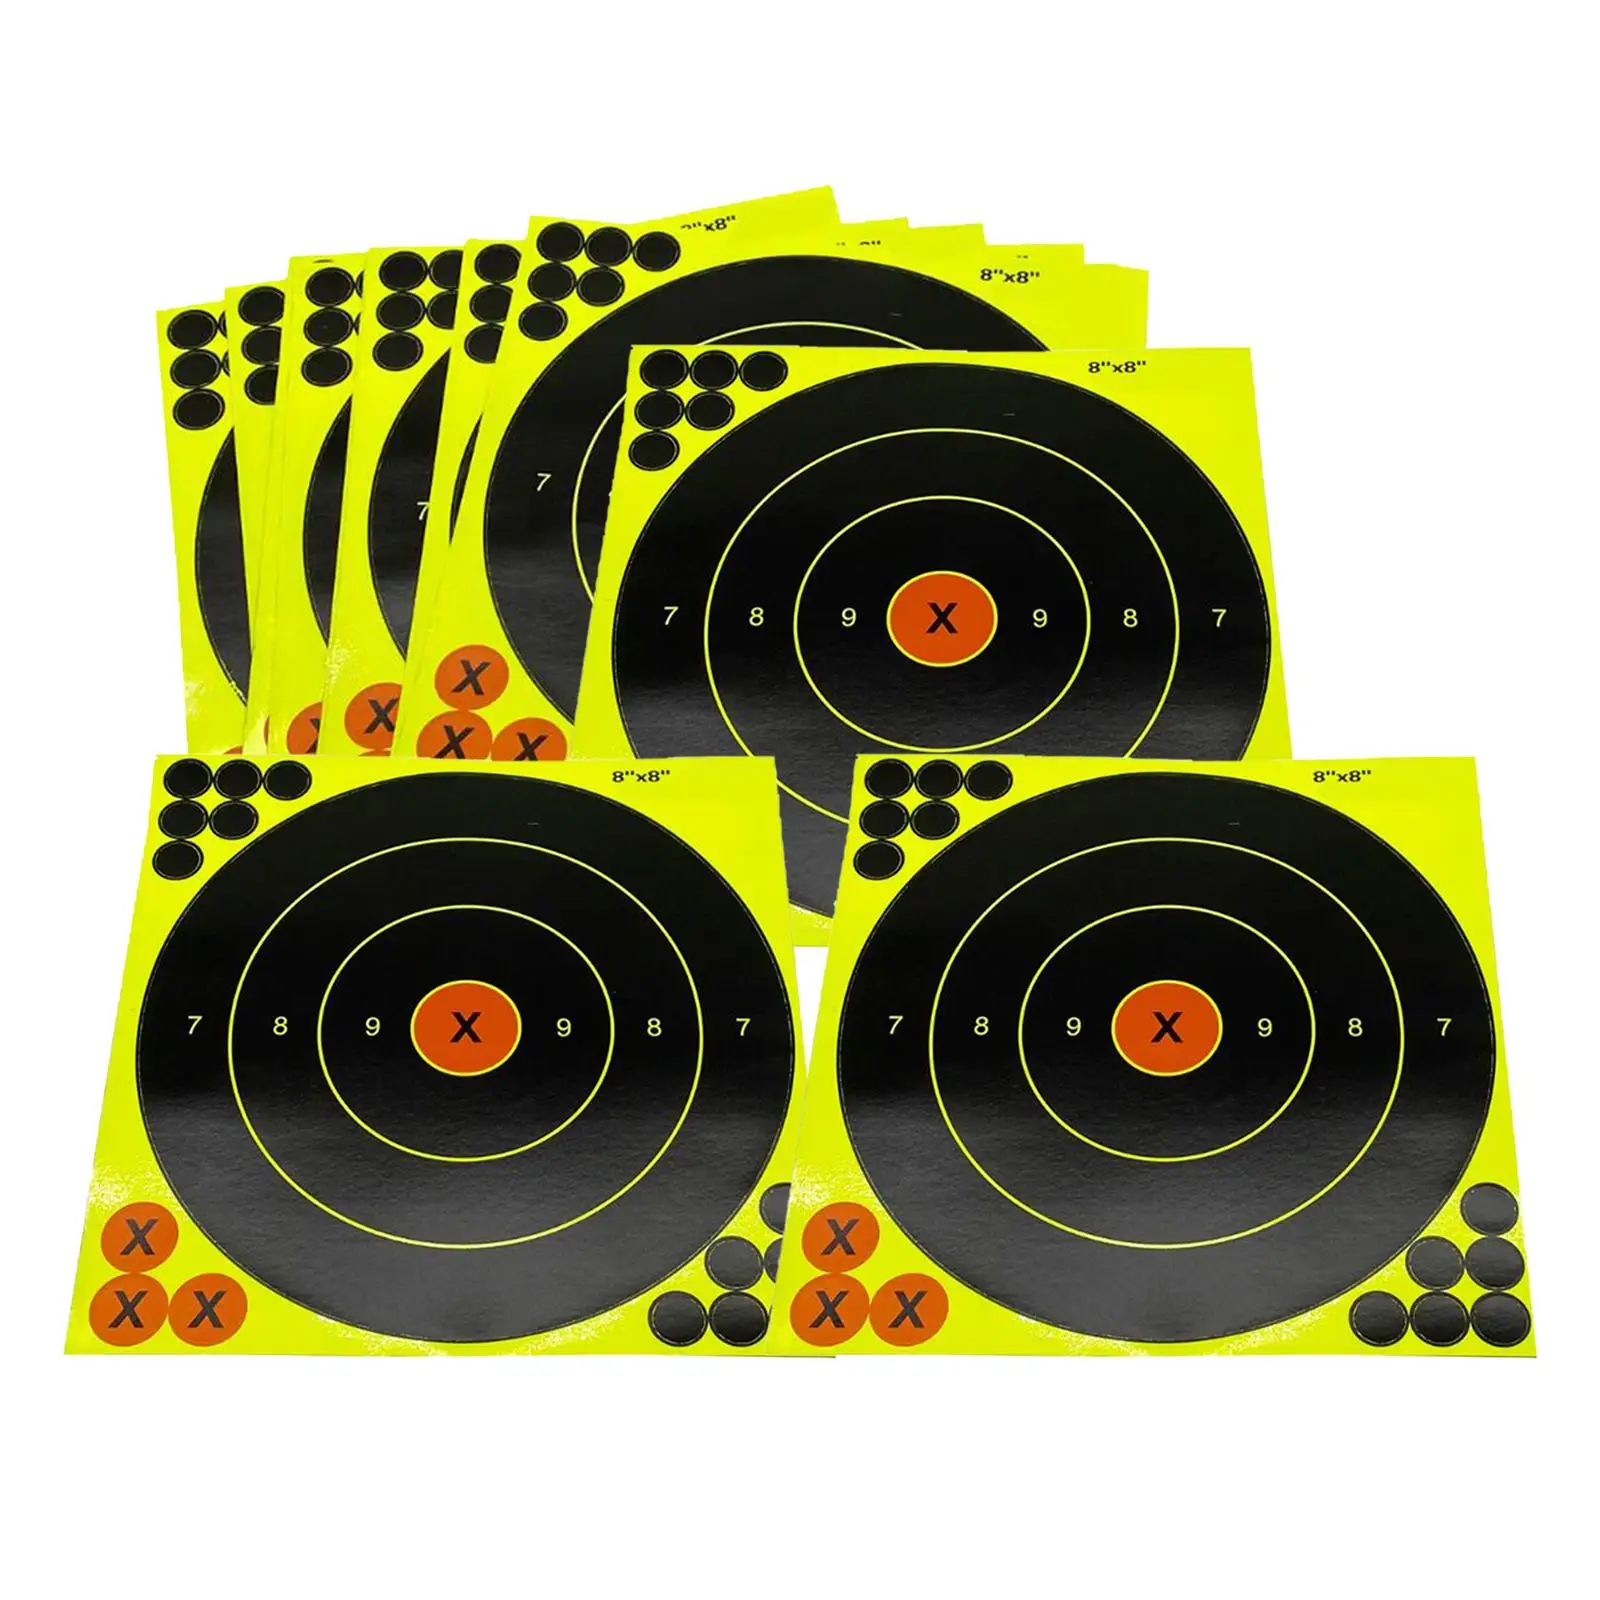 10x 8 inch Shooting Target Self Adhesive Paper Stickers Replacement Reactive Splatter for Shooting Practice Outdoor Training